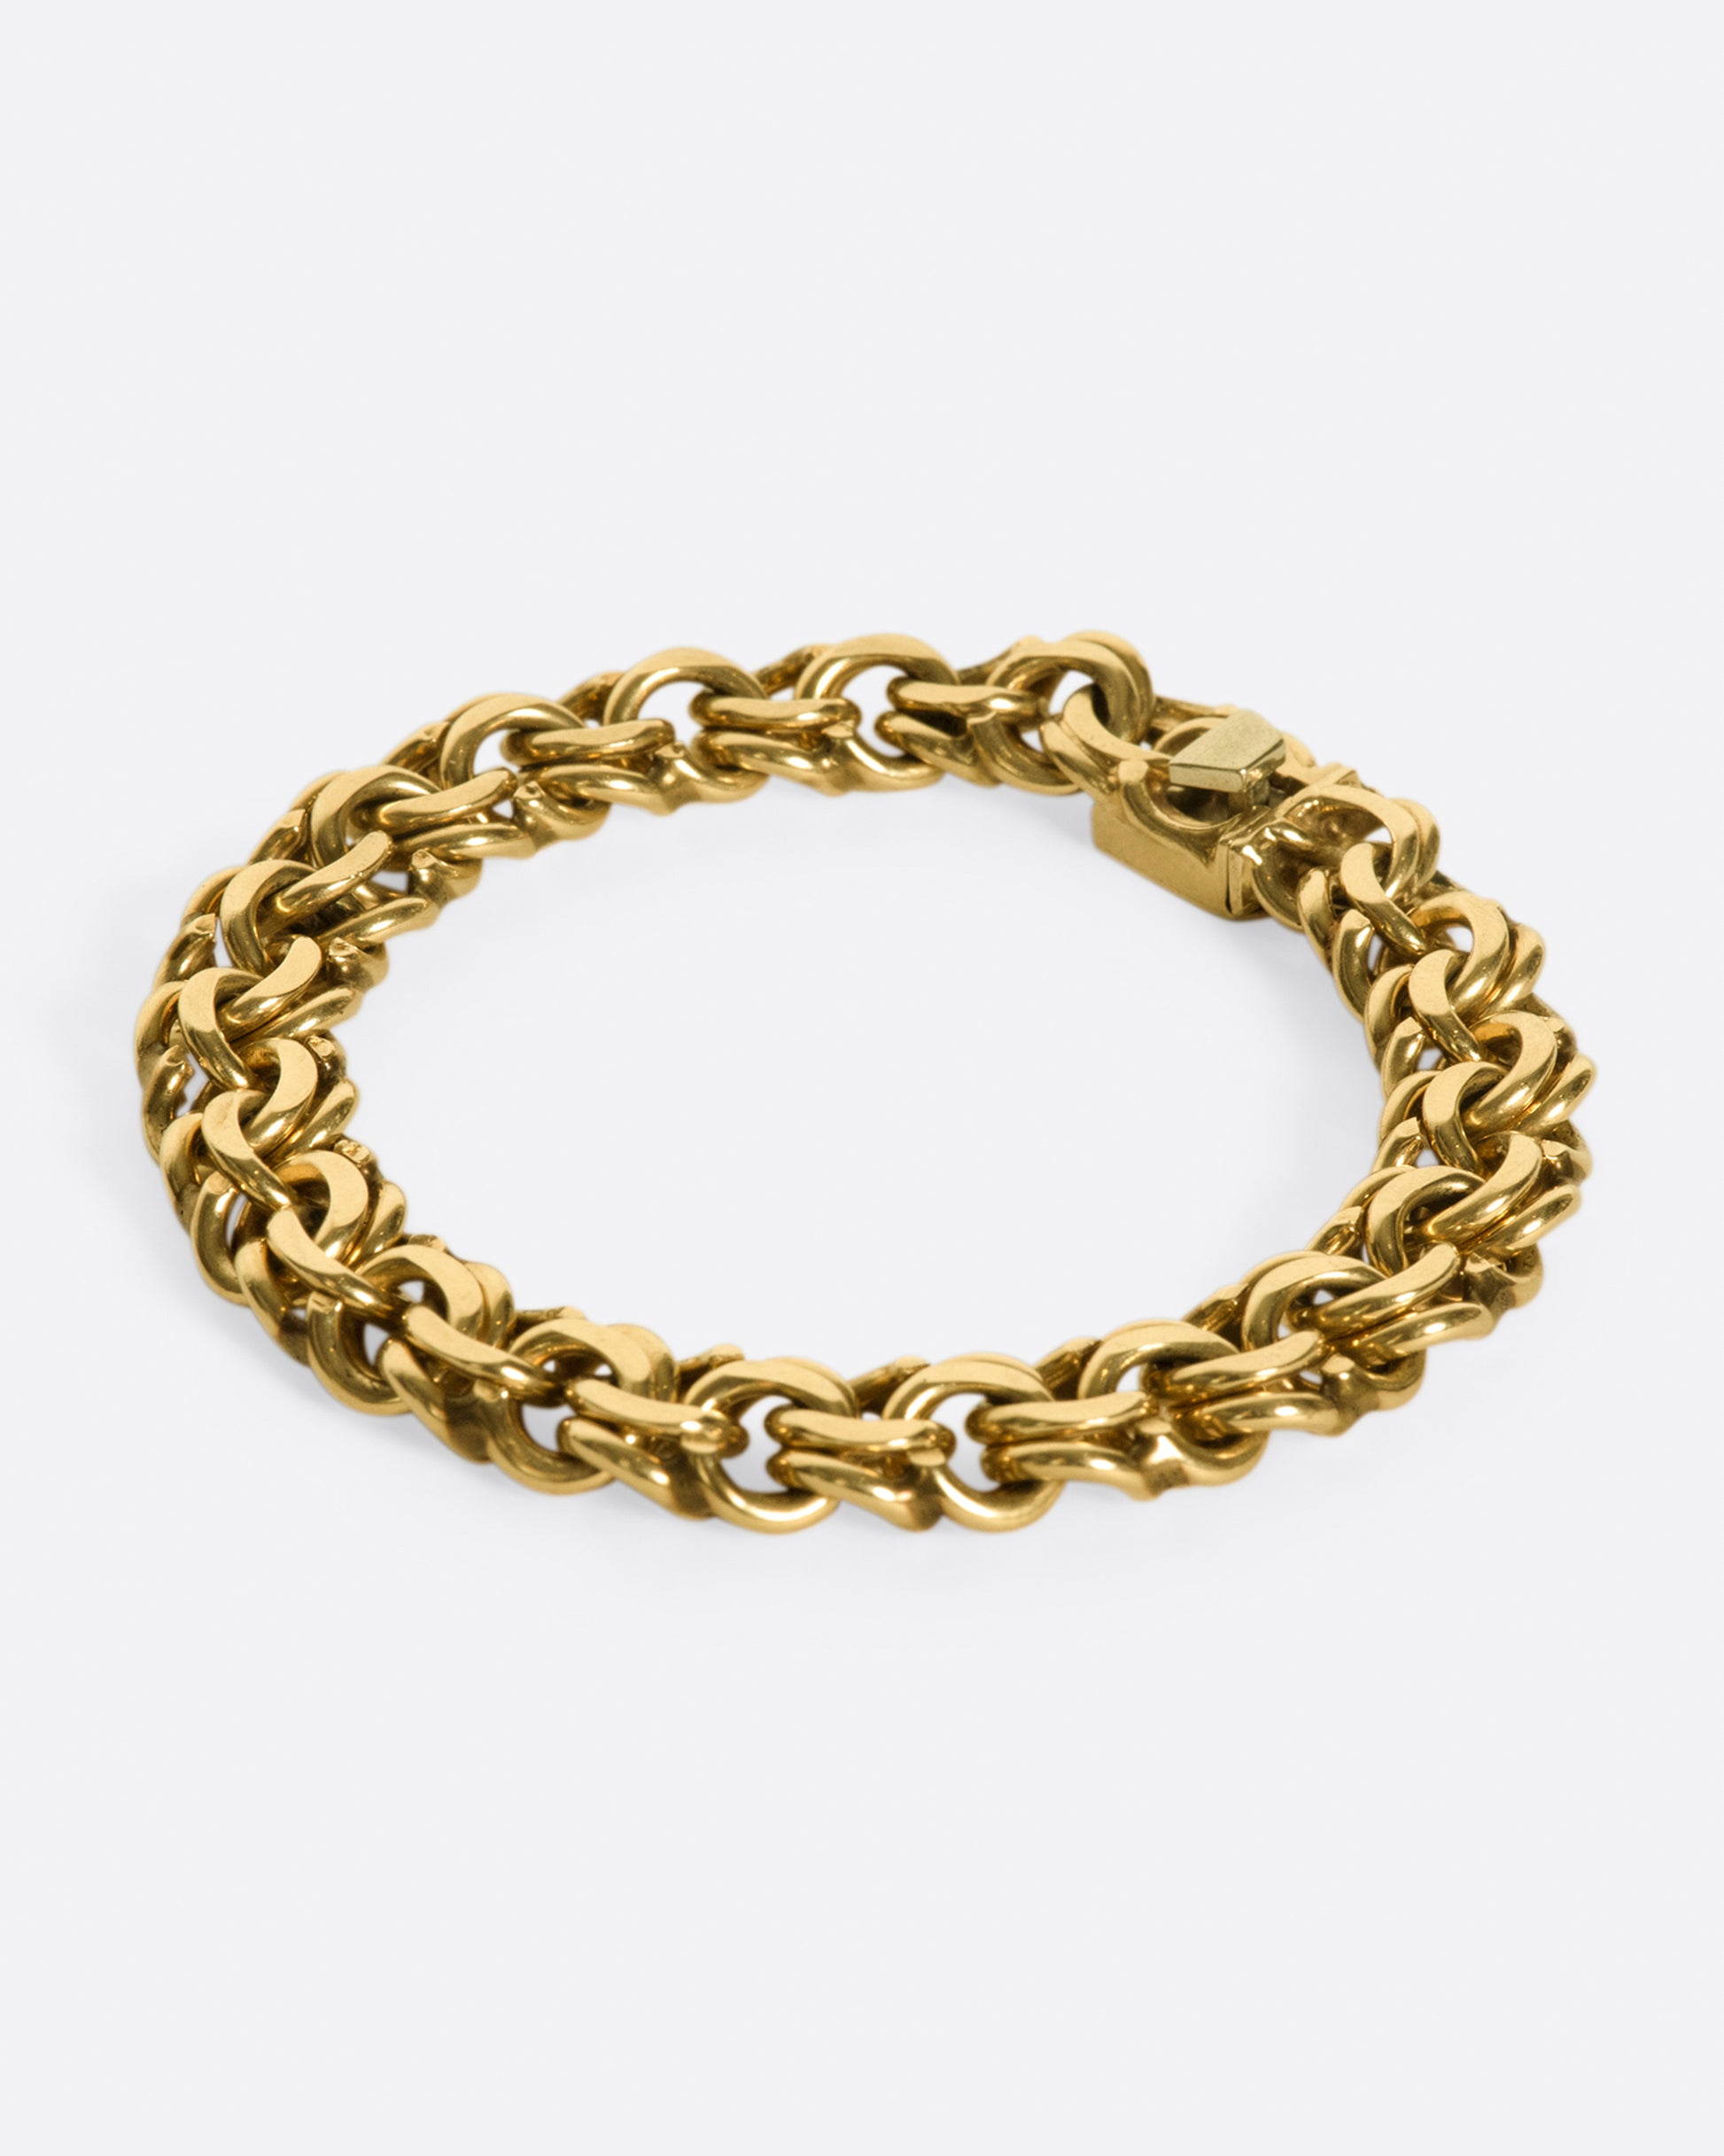 A heavy, woven chain bracelet that you won't want to take off.